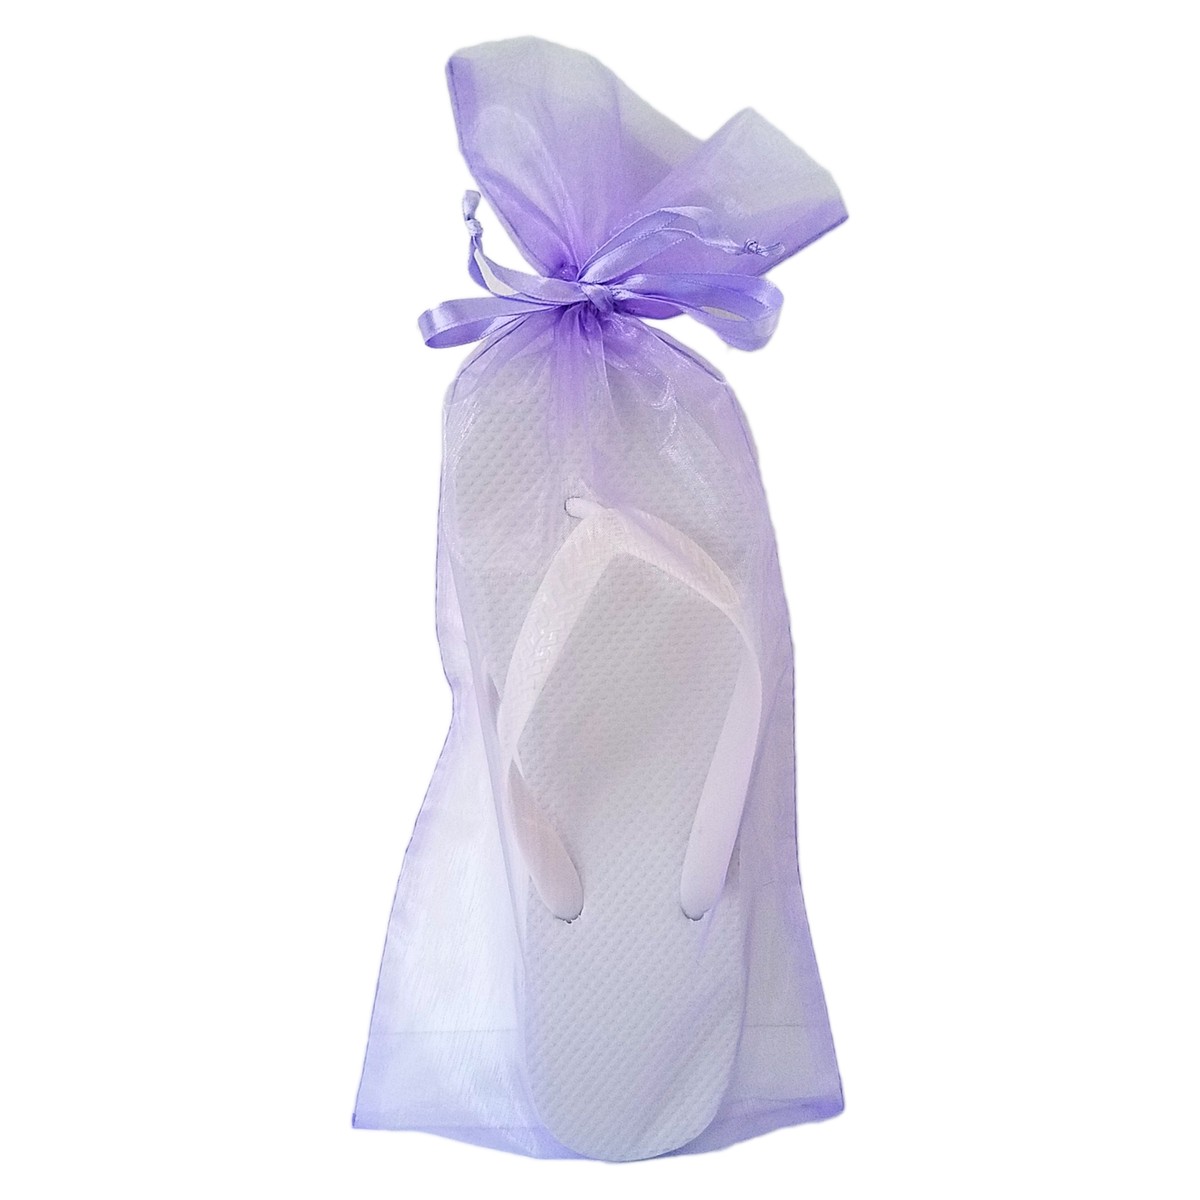 Organza Bags 3x4, Favor Bags or Gift Bags, Drawstring Jewelry Pouch -  PlumPolkaDot